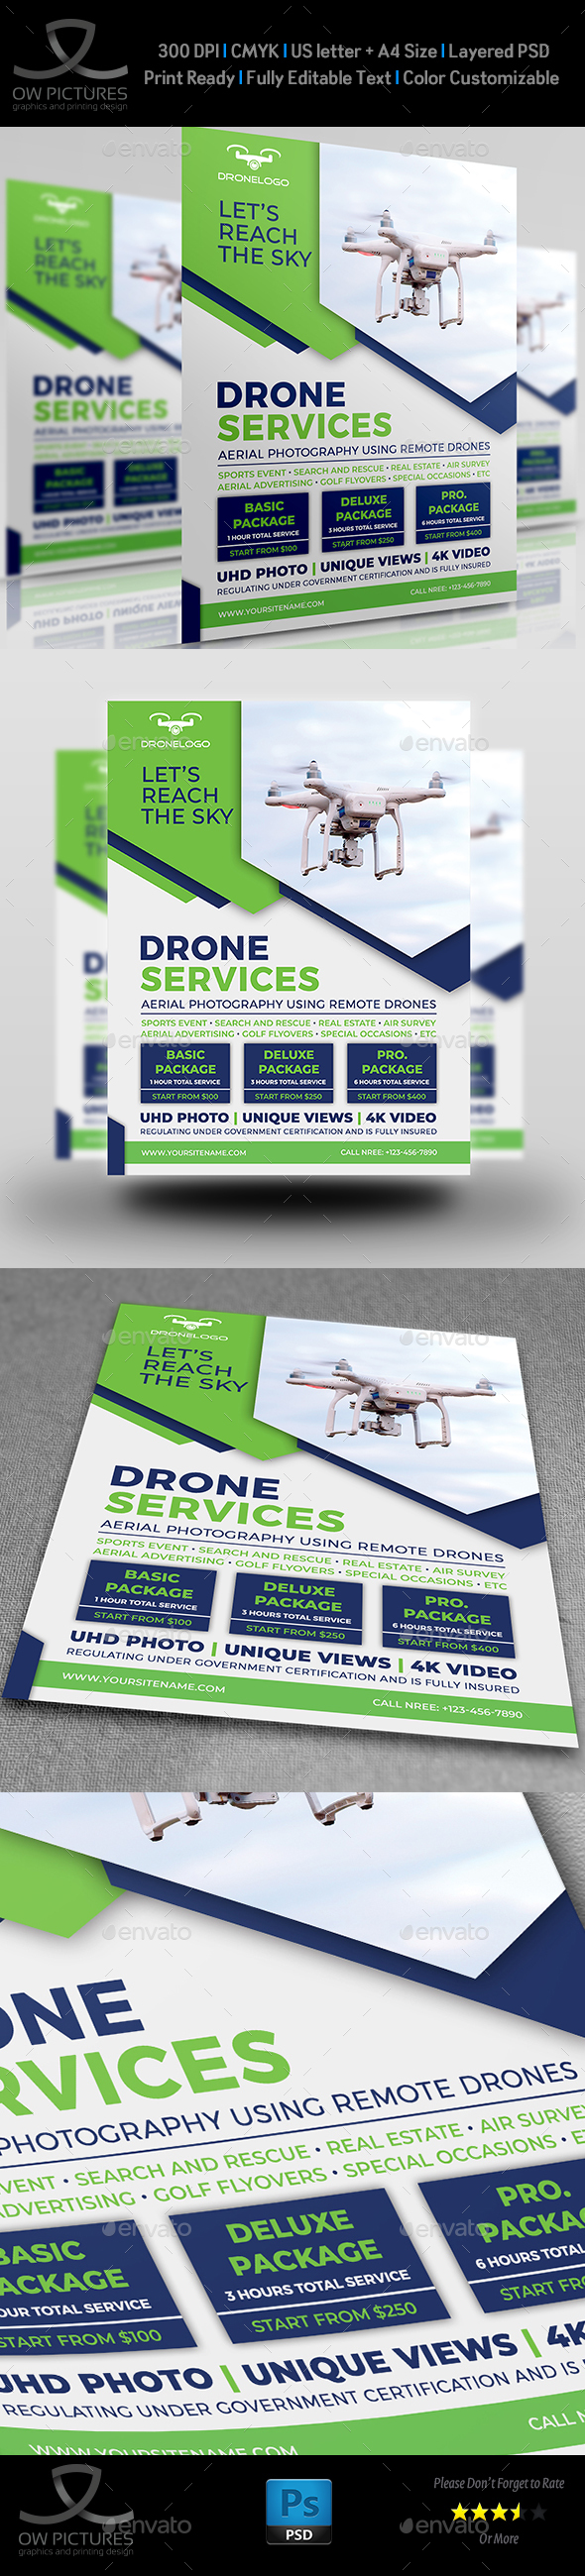 Drone Services Flyer Template